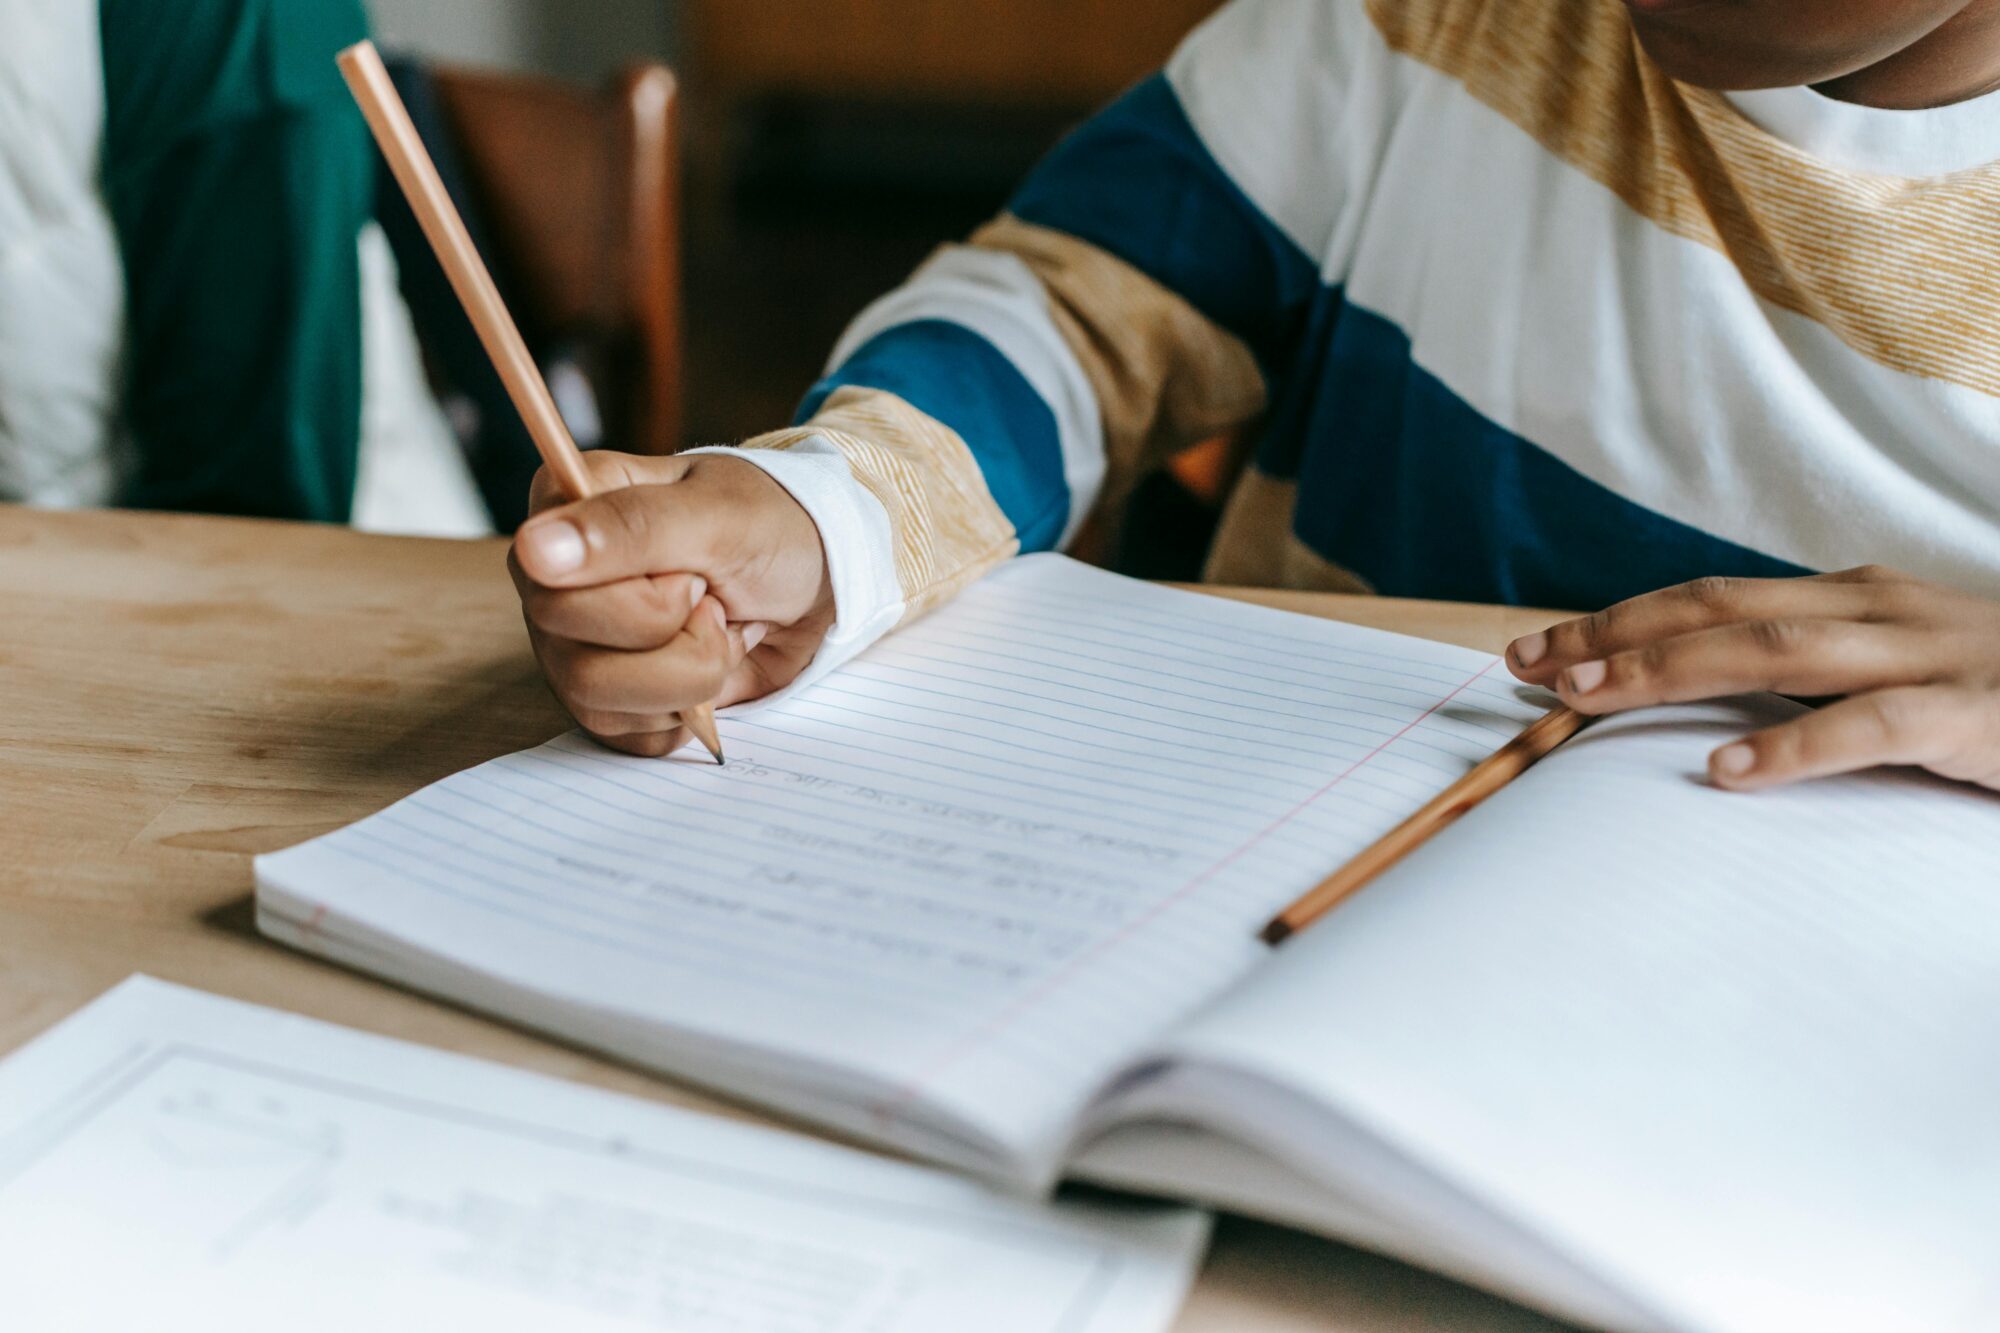 Midsection of Black boy writing in a notebook with a pencil. (Photo by Katerina Holmes via Pexels)